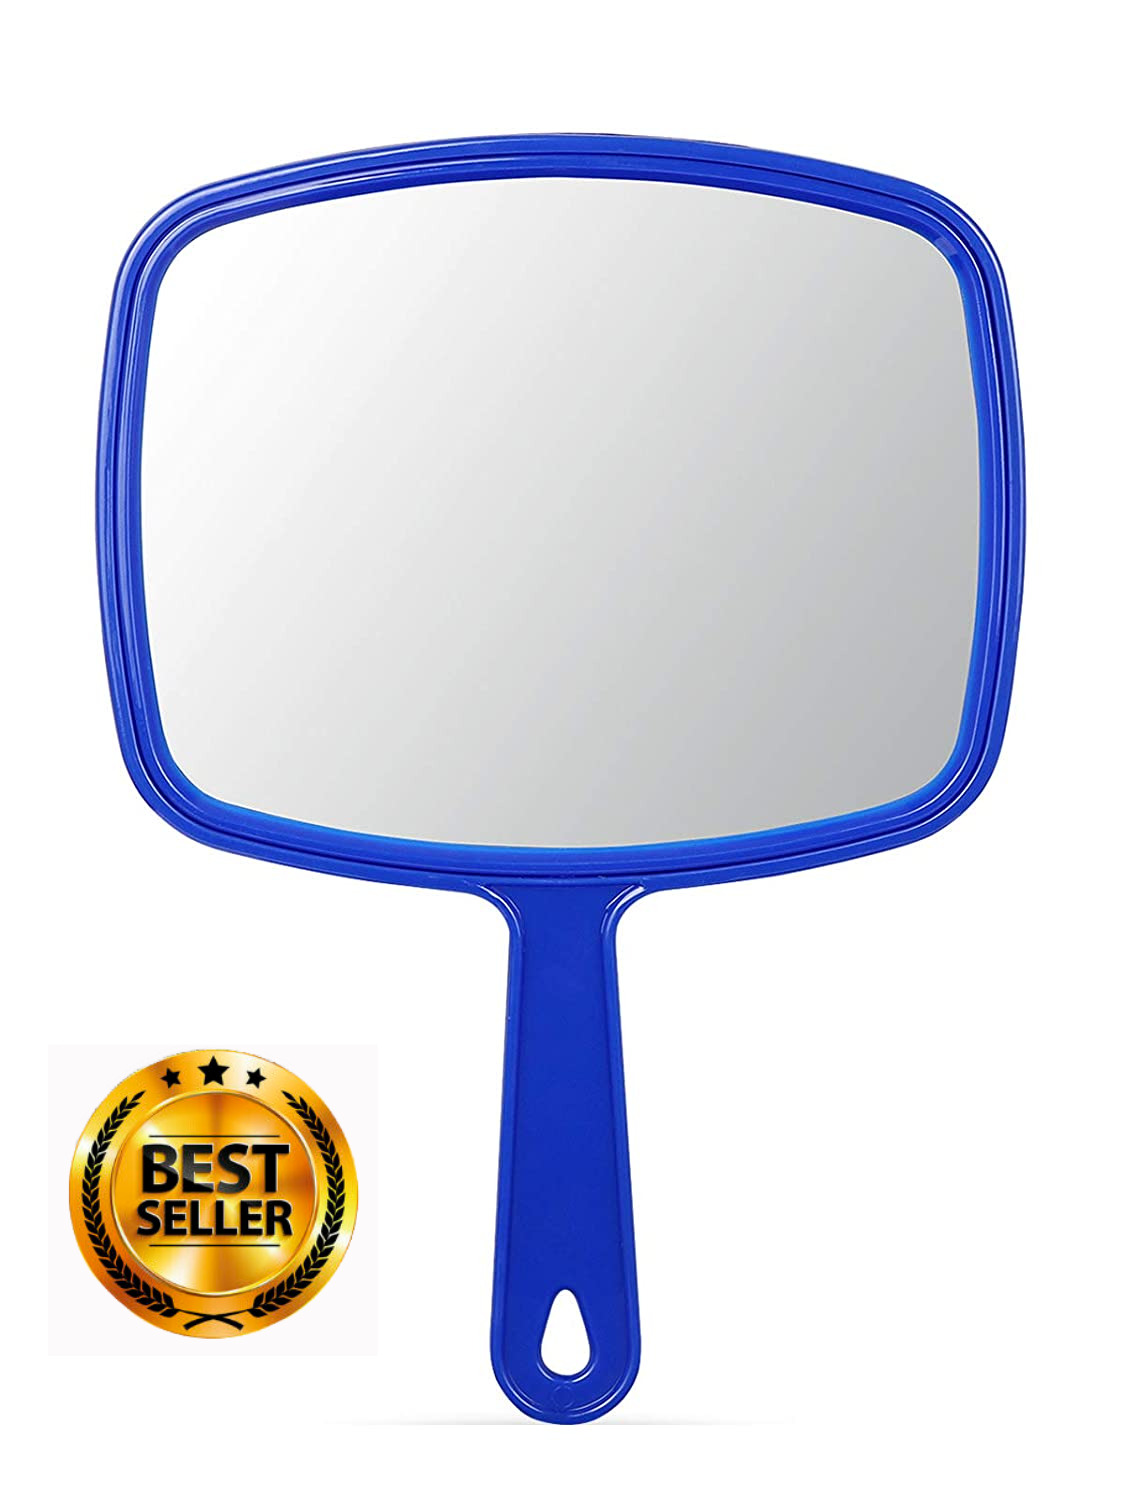 American Old Hand Mirror, Handheld Mirror with Handle Blue